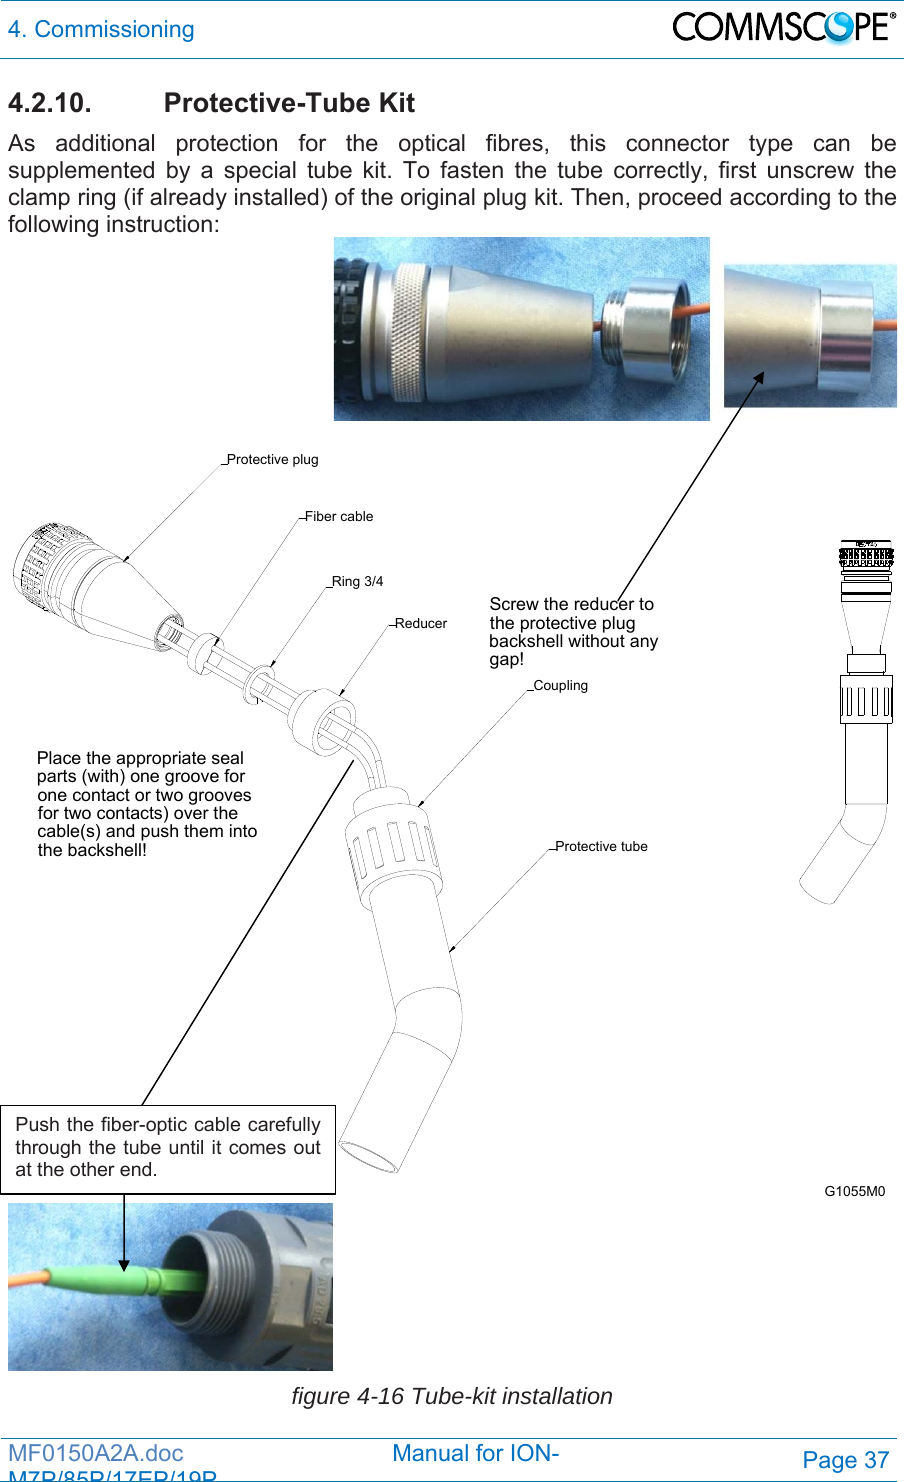 4. Commissioning  MF0150A2A.doc                                Manual for ION-M7P/85P/17EP/19PPage 37 4.2.10. Protective-Tube Kit As additional protection for the optical fibres, this connector type can be supplemented by a special tube kit. To fasten the tube correctly, first unscrew the clamp ring (if already installed) of the original plug kit. Then, proceed according to the following instruction:    Screw the reducer to the protective plug backshell without any gap!Place the appropriate seal parts (with) one groove for one contact or two grooves for two contacts) over the cable(s) and push them into the backshell! Protective tubeReducerCouplingProtective plugFiber cableRing 3/4G1055M0   figure 4-16 Tube-kit installation Push the fiber-optic cable carefully through the tube until it comes out at the other end. 